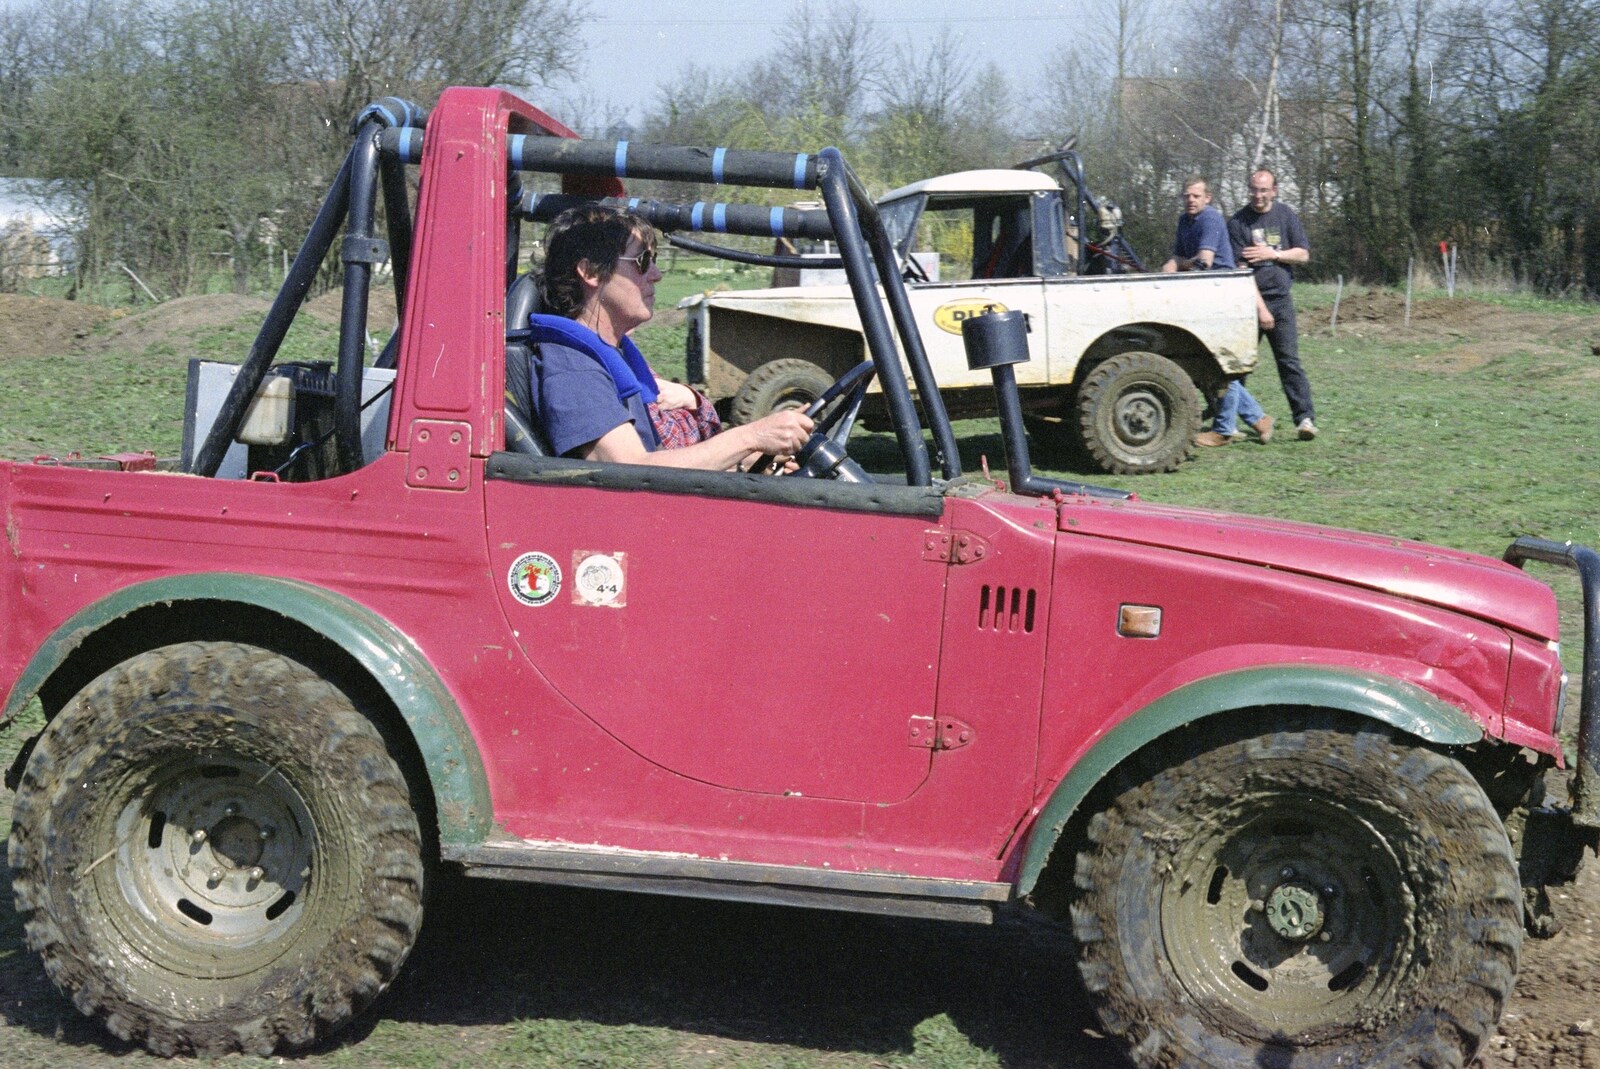 Brenda drives around from Lunch and Dinner at Mad Sue's, Stuston, Suffolk - 30th March 1995